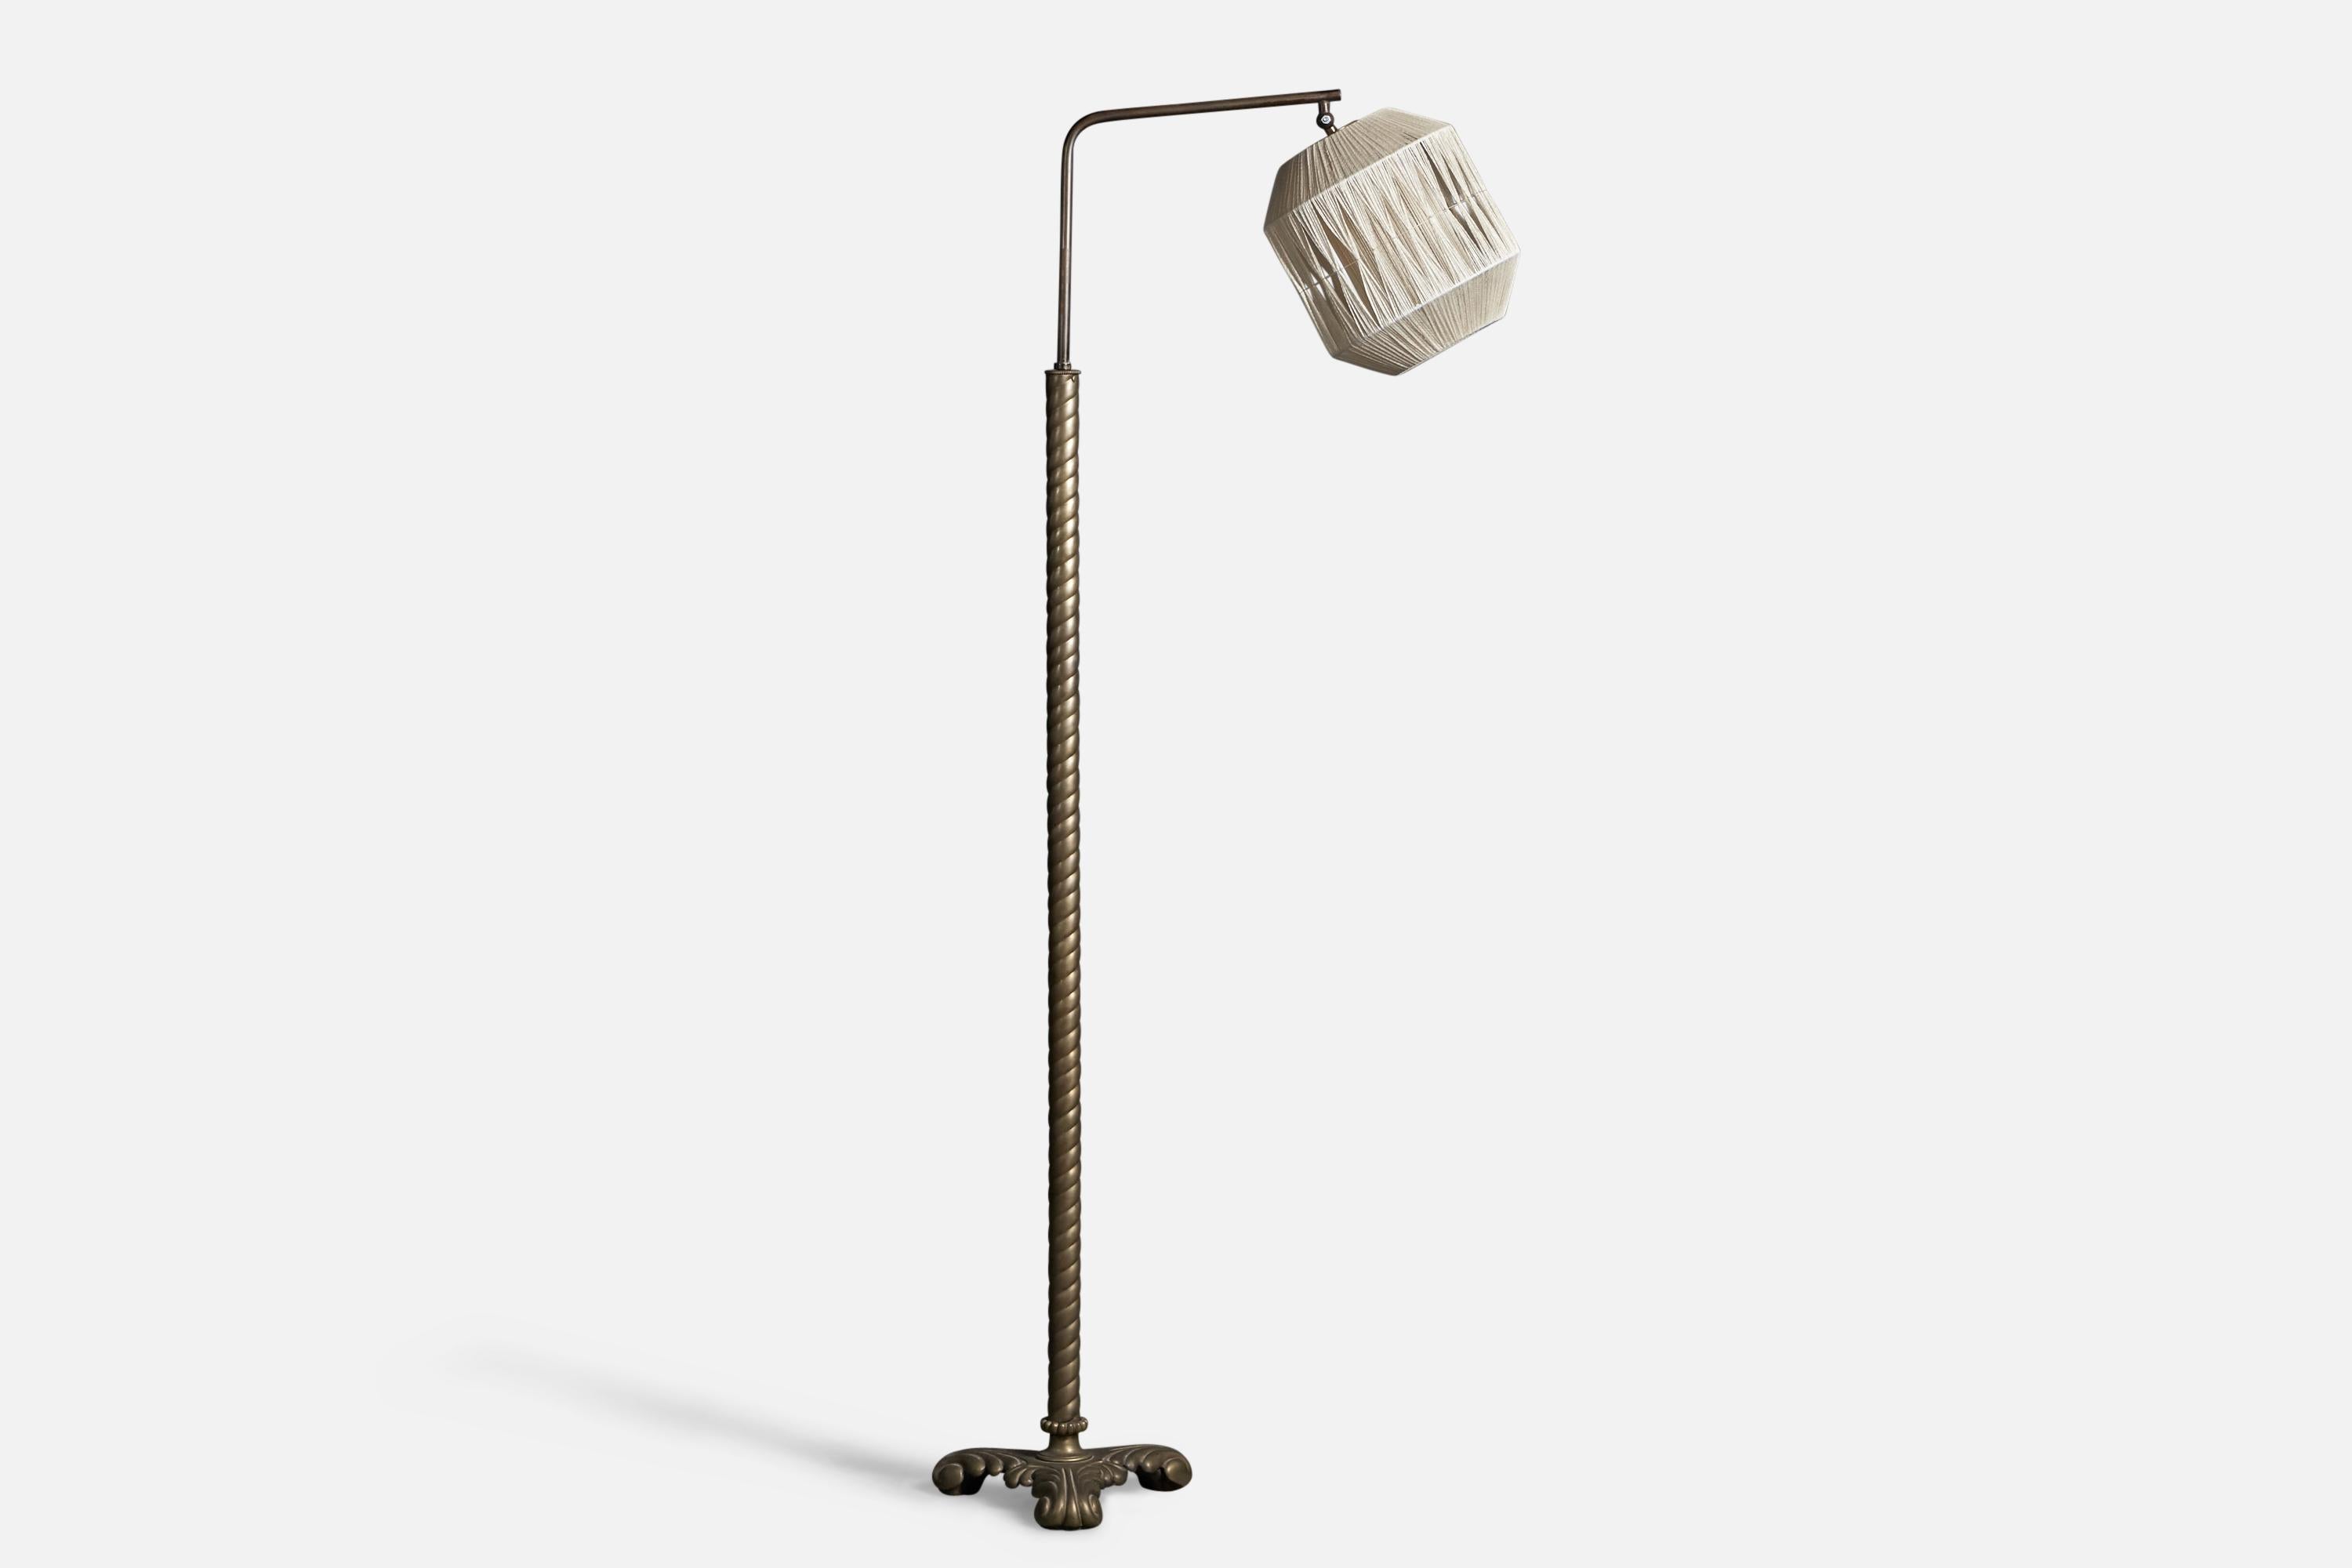 An adjustable brass and fabric string floor lamp, designed and produced in Italy, c. 1930s.
Overall Dimensions: 58